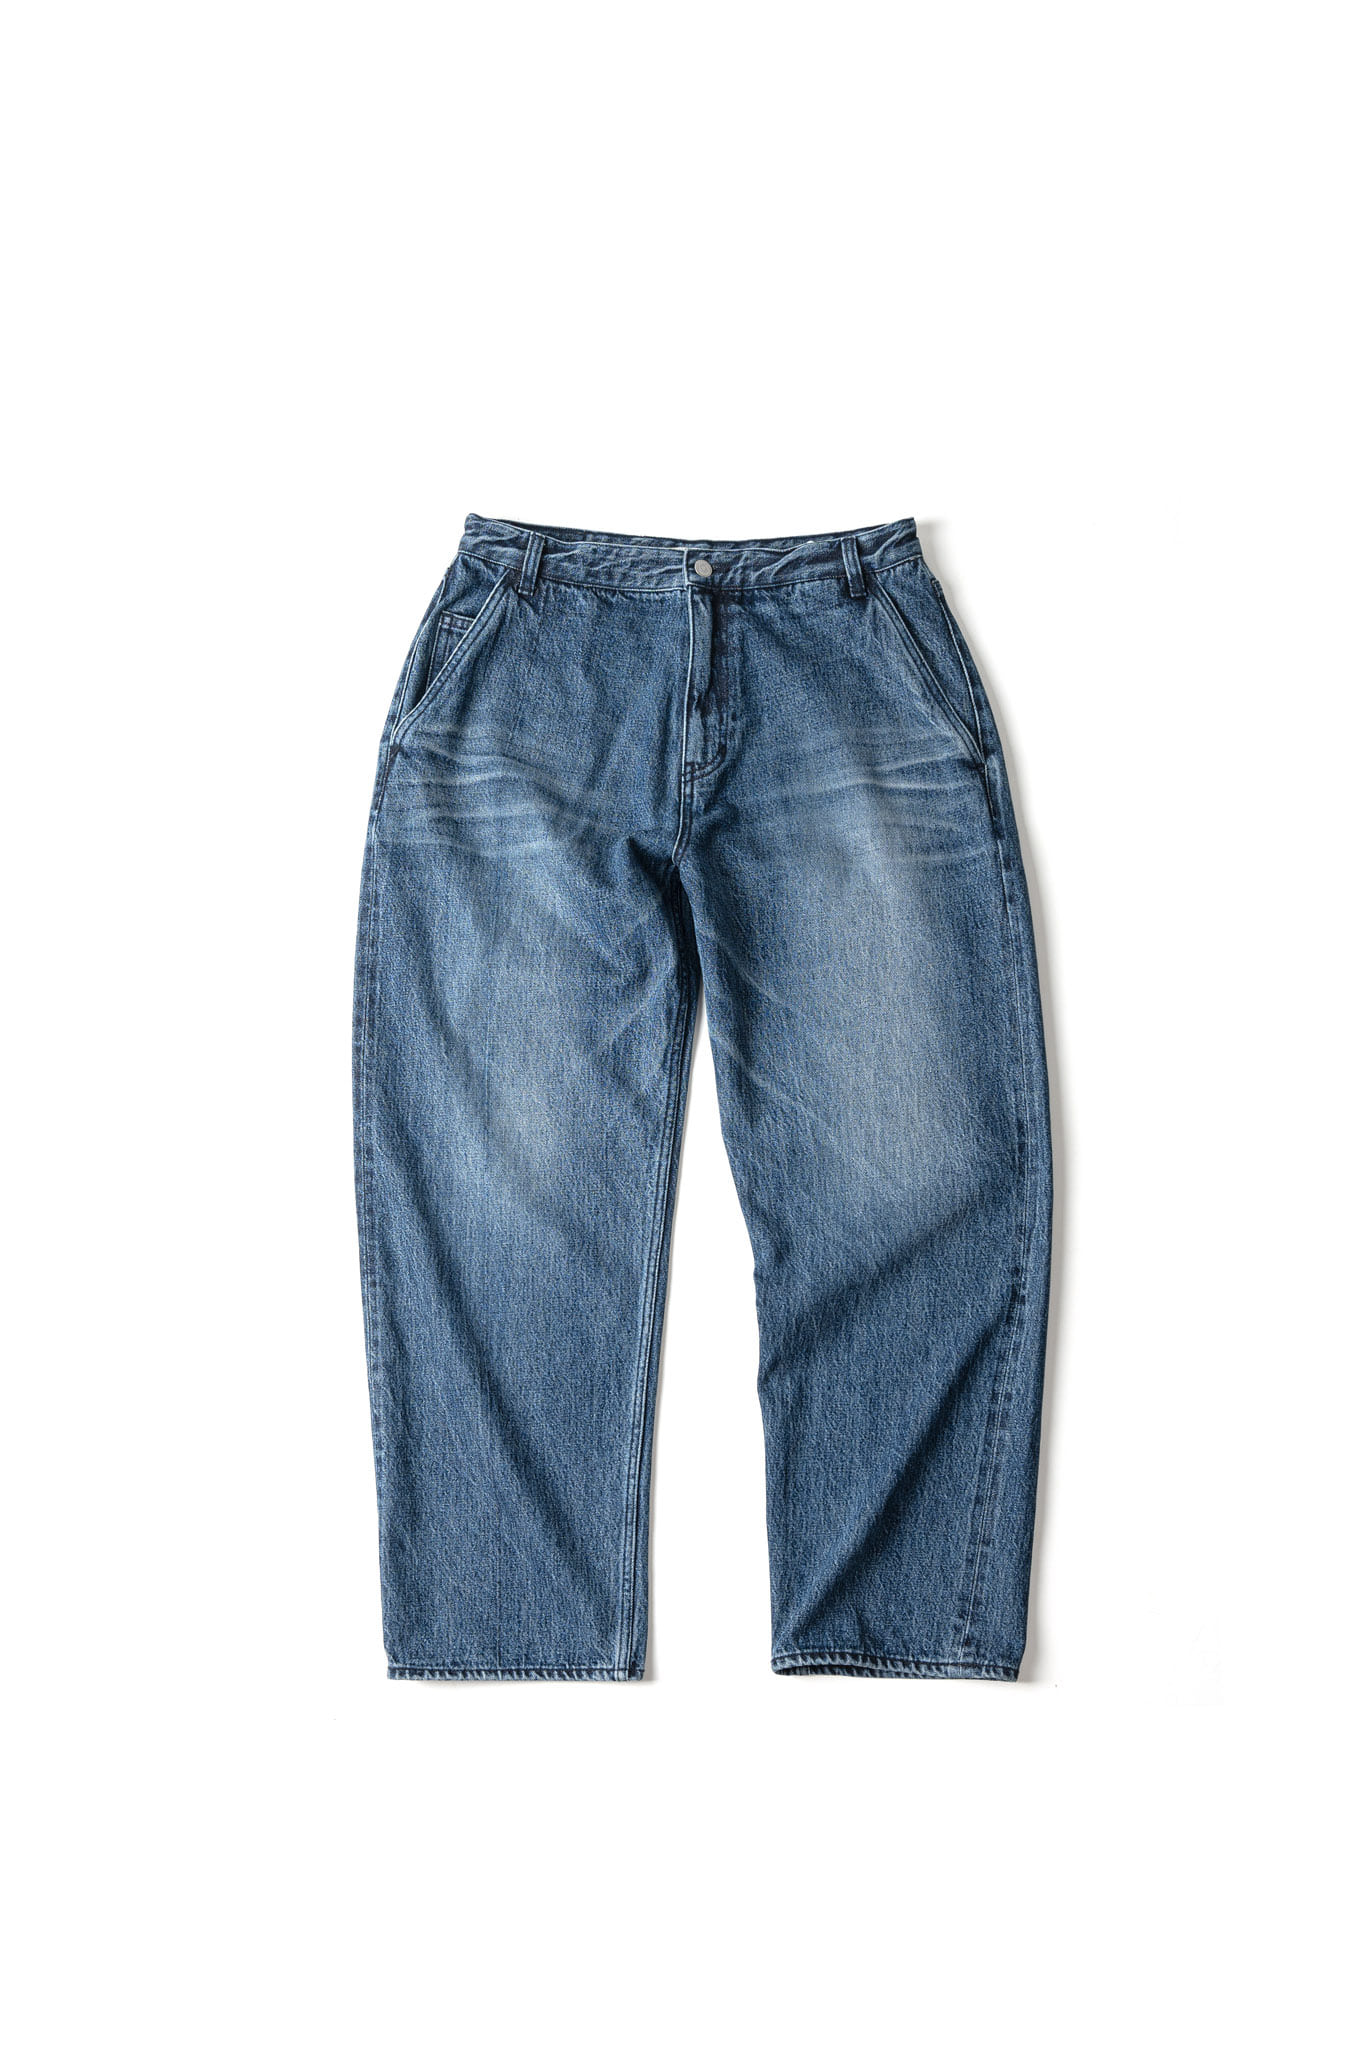 [23FW] ORGANIC COTTON RELAXED DENIM PANTS - WASHED BLUE